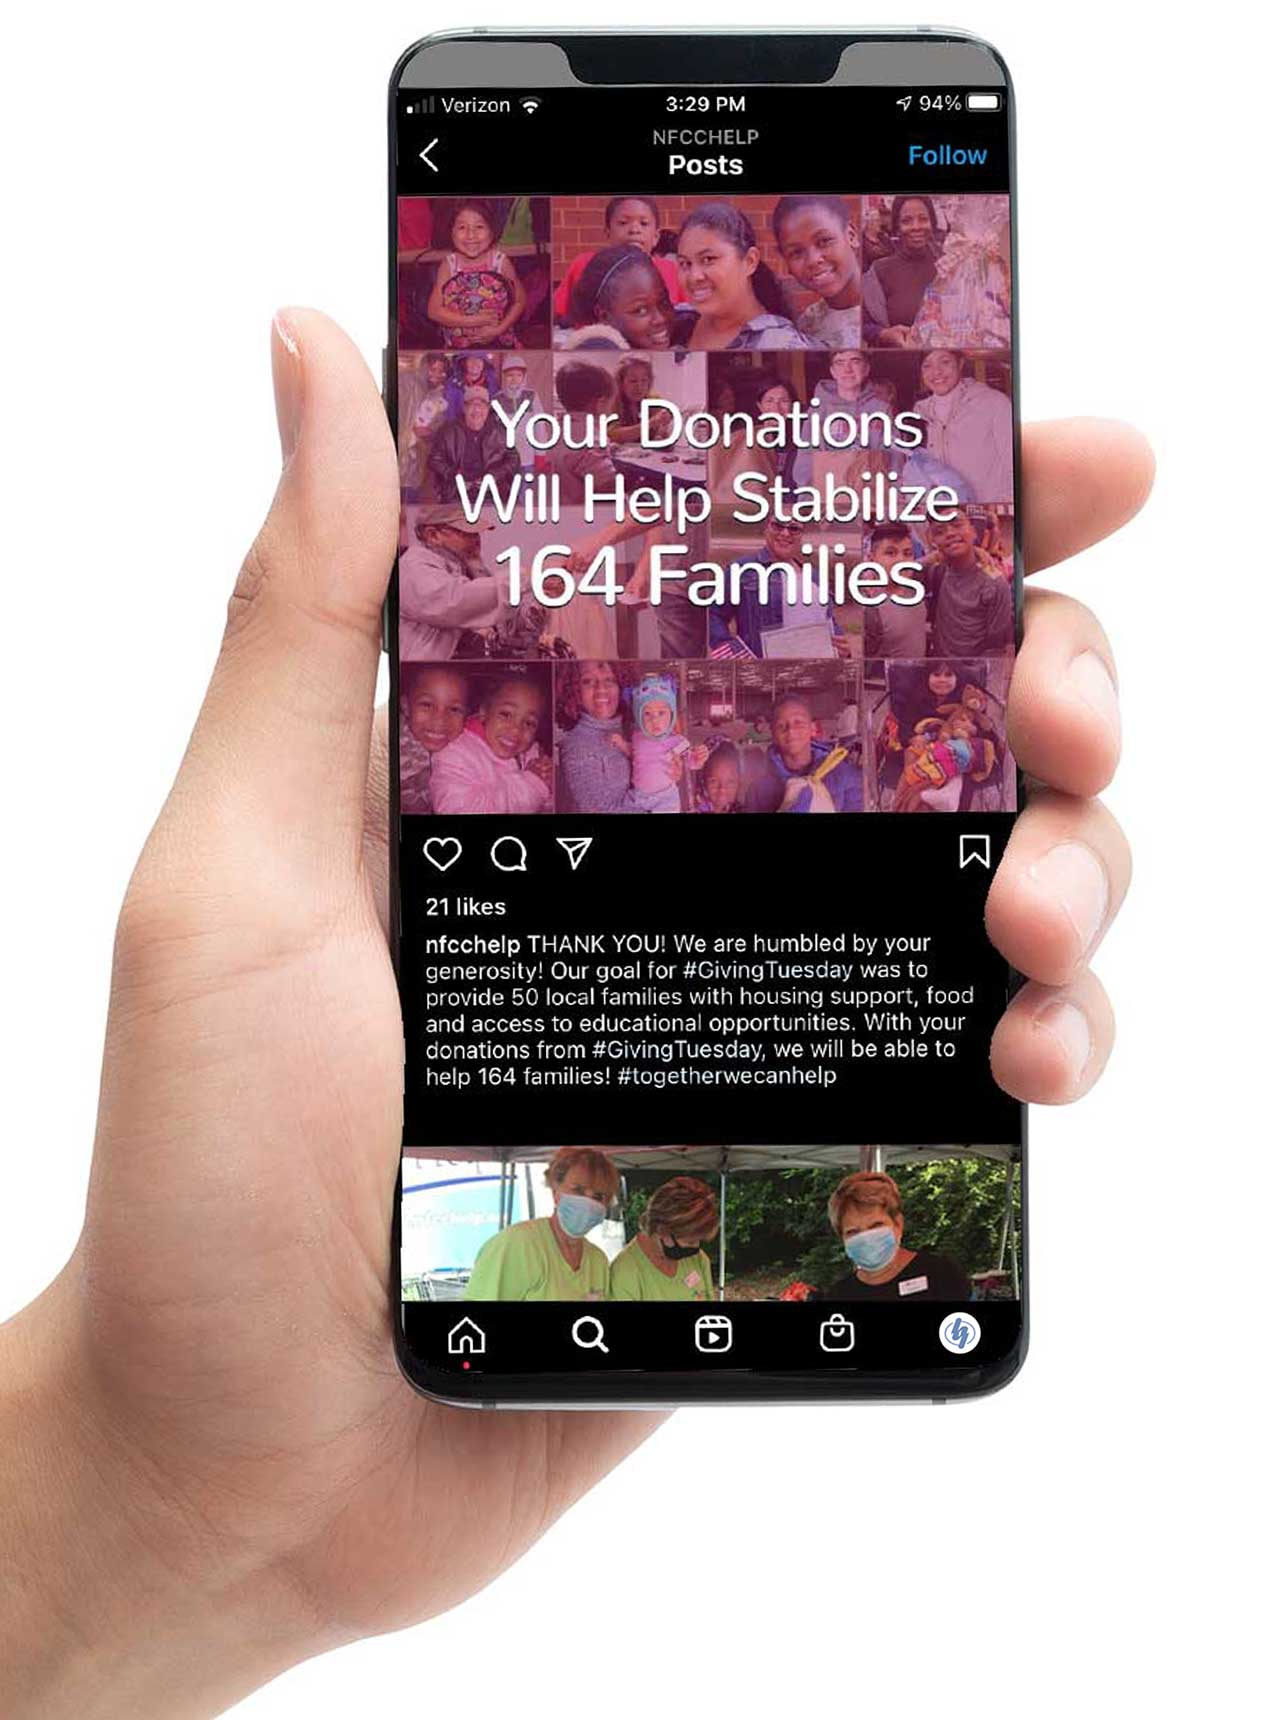 Hand holding mobile phone with NFCC social media image displayed